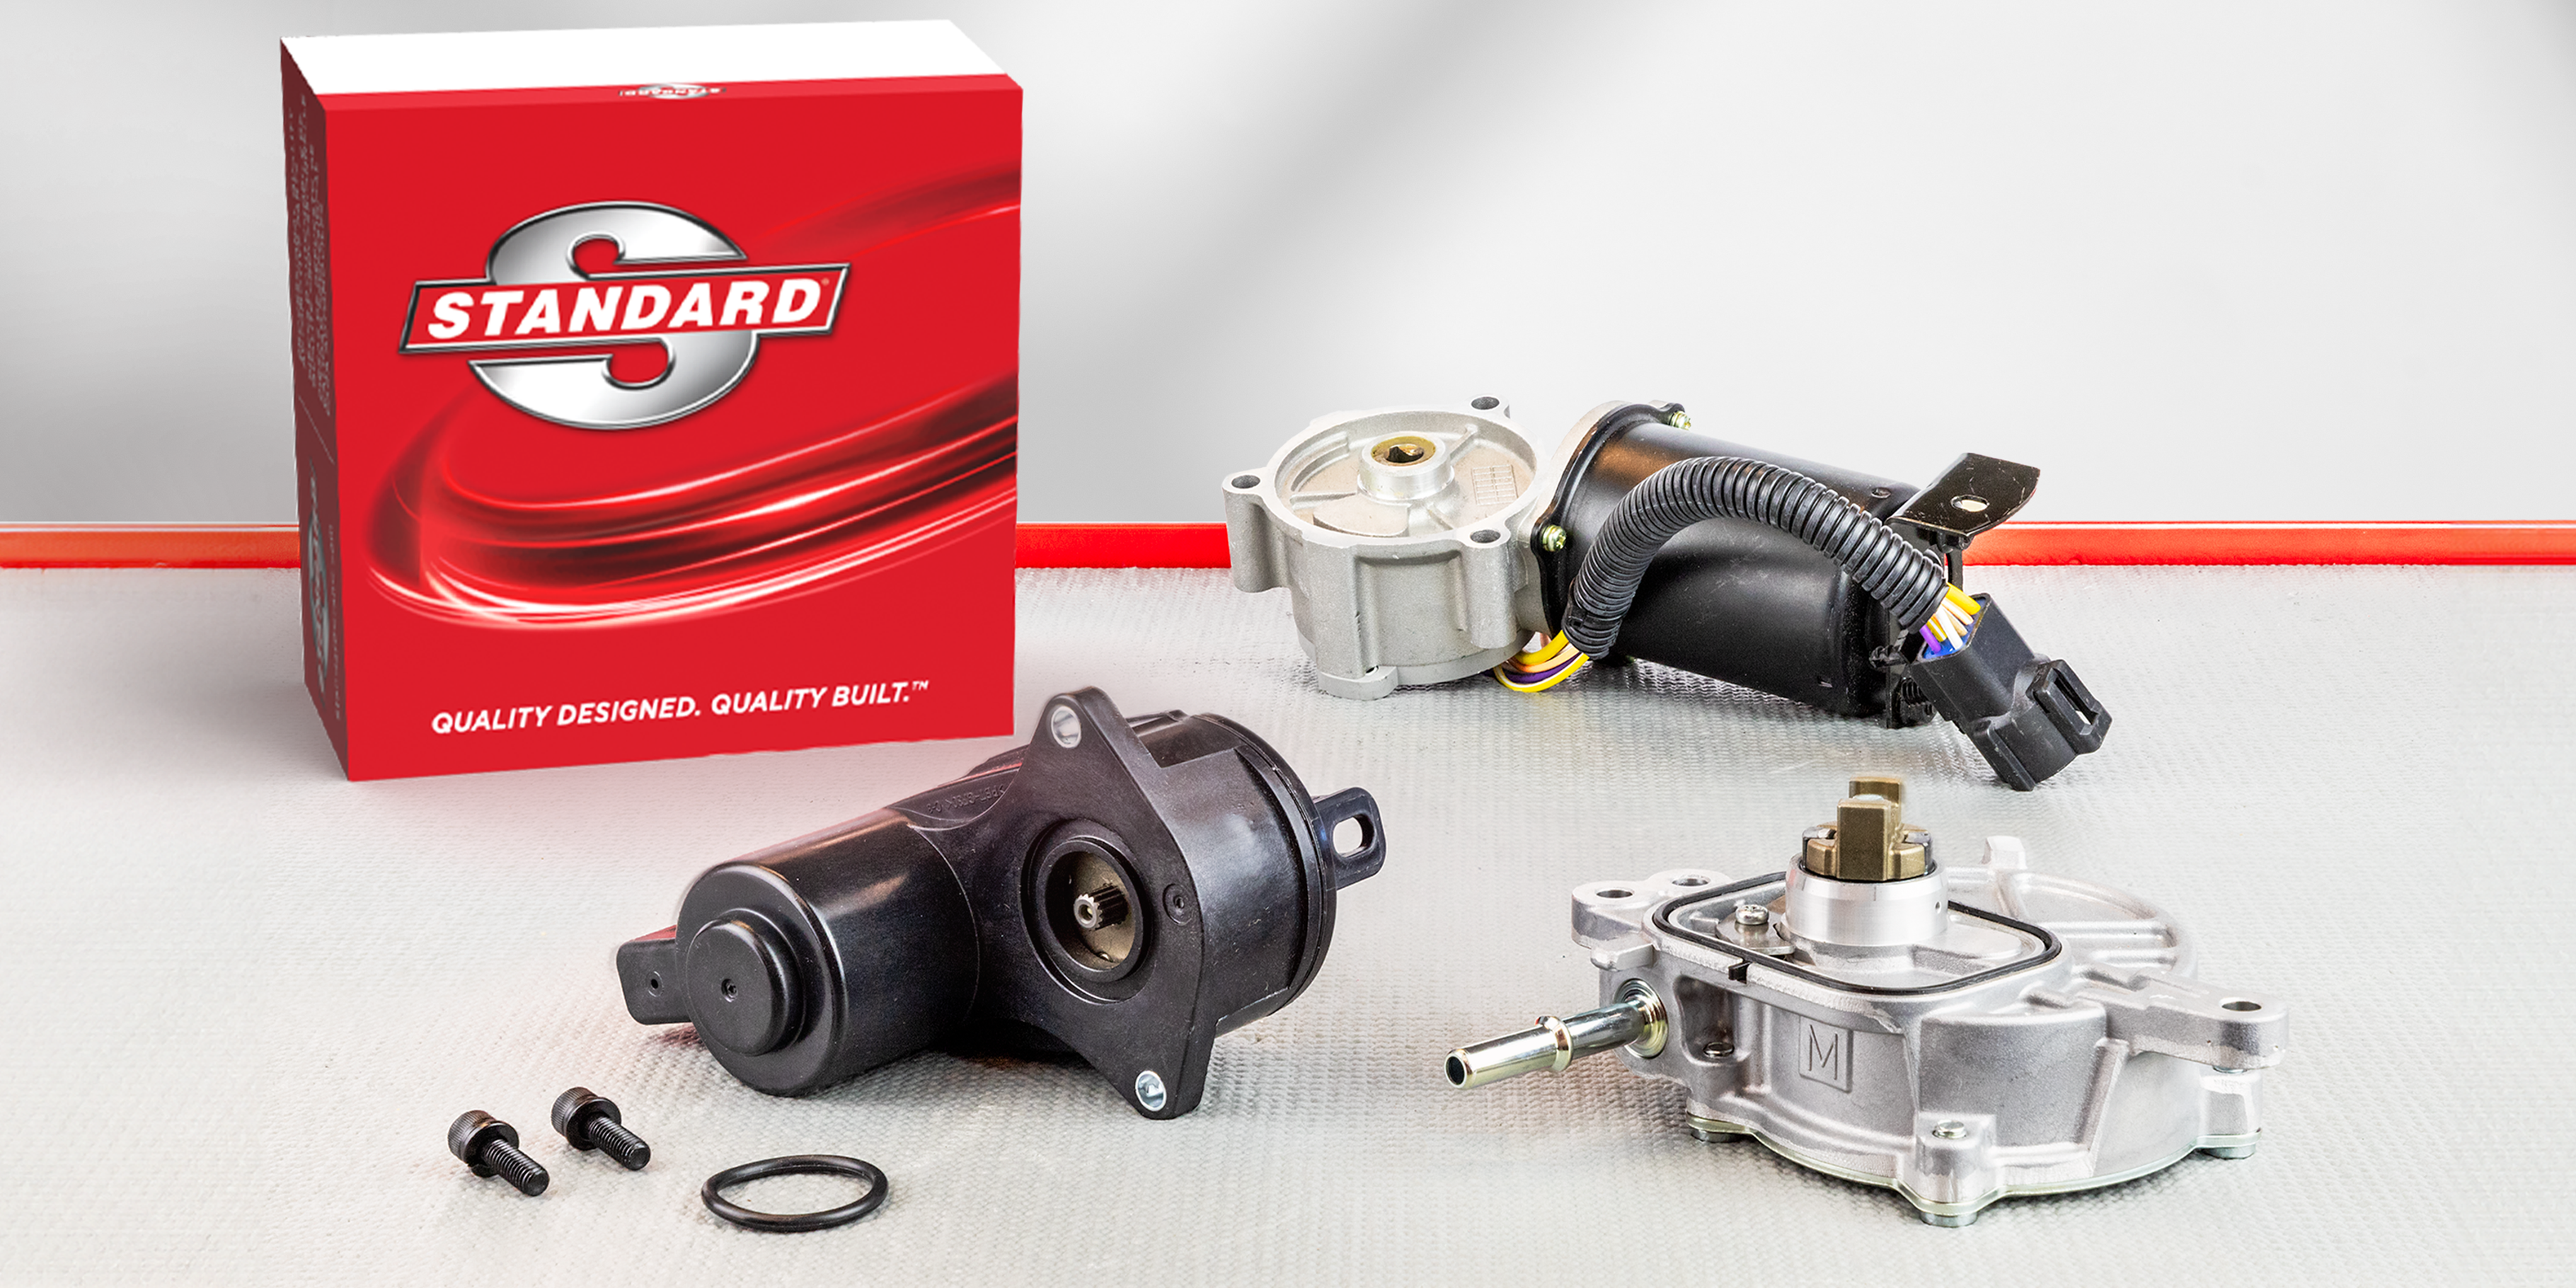 Standard Motor Products Expands Additional Categories